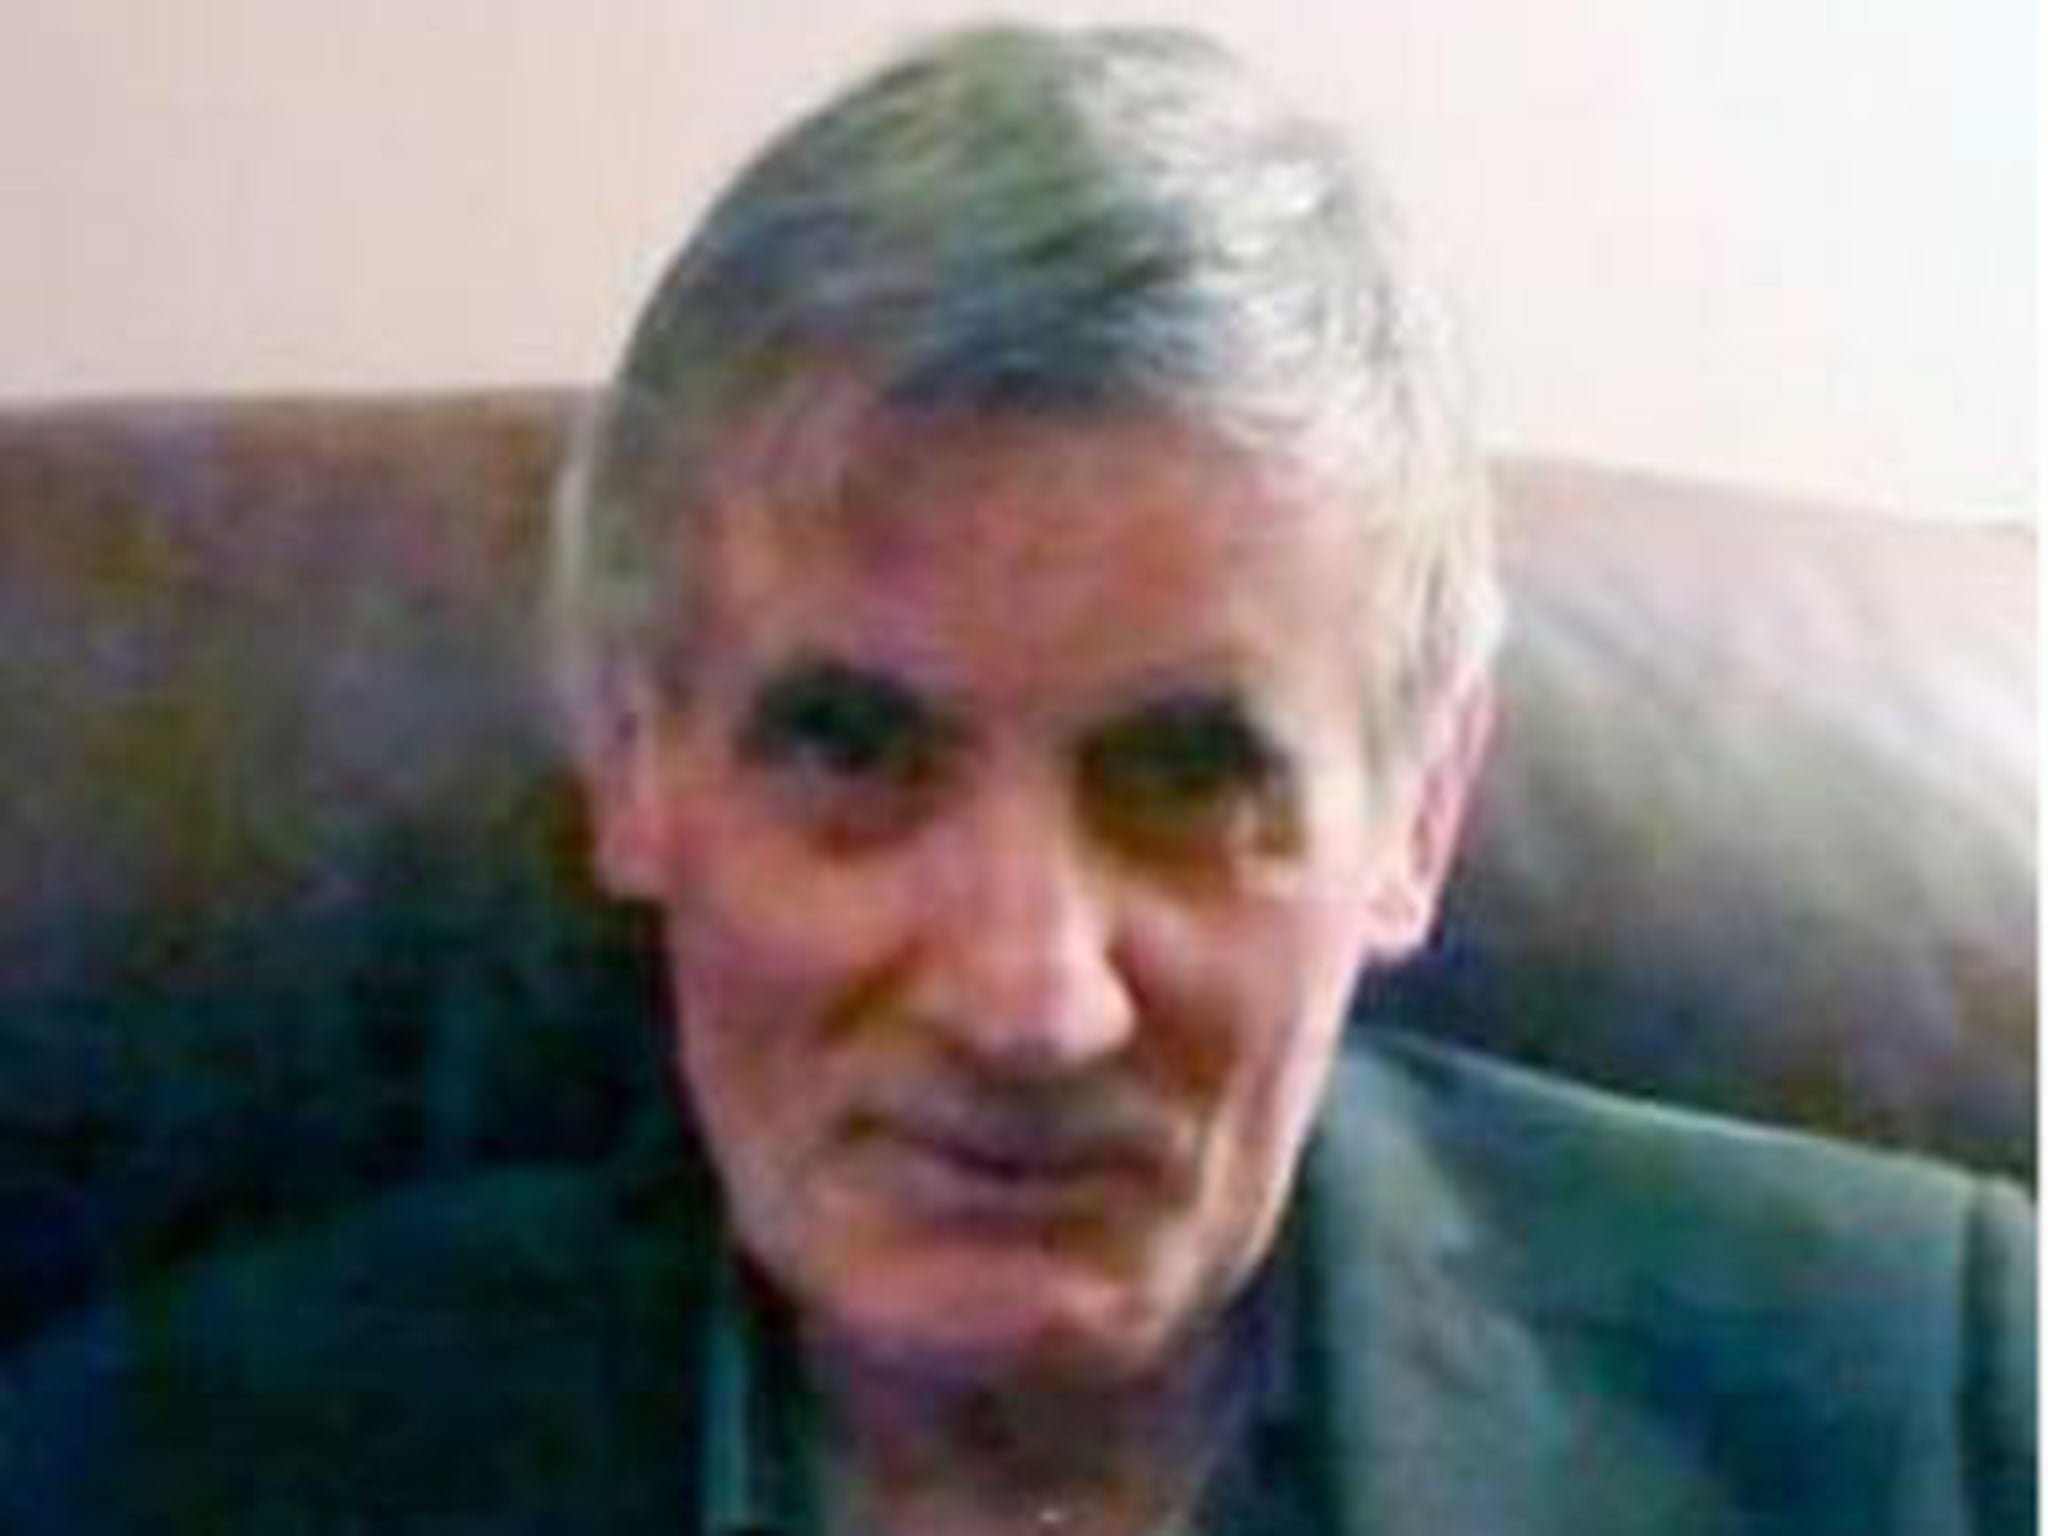 Police are appealing for information on the blaze that killed 70-year-old John Nolan